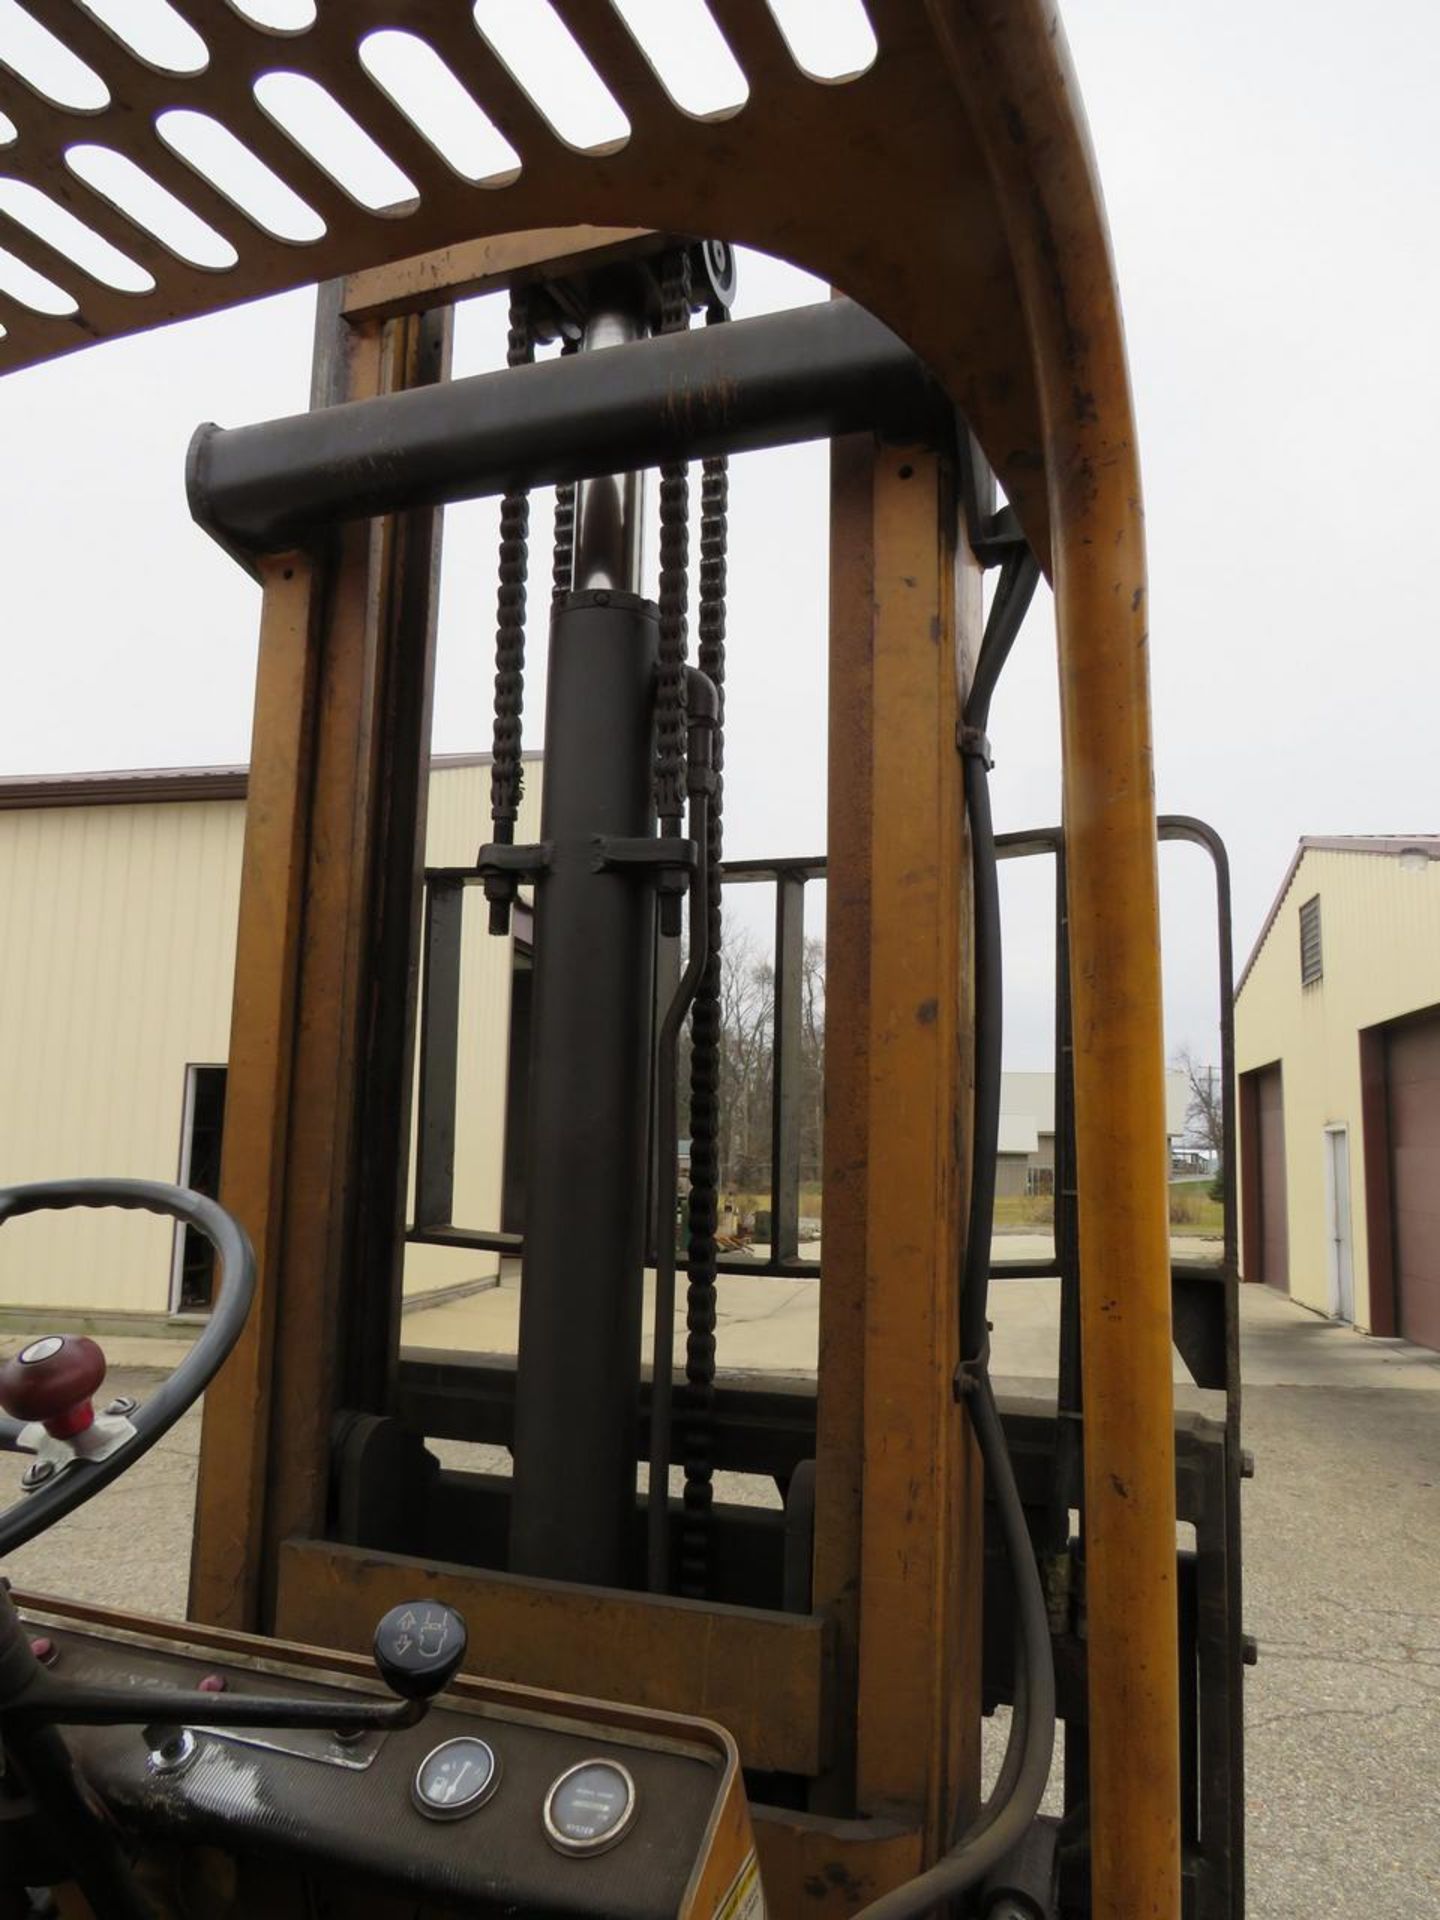 HYSTER H80C 8,000 LB. CAPACAITY GASOLINE POWERED FORKLIFT - Image 14 of 18